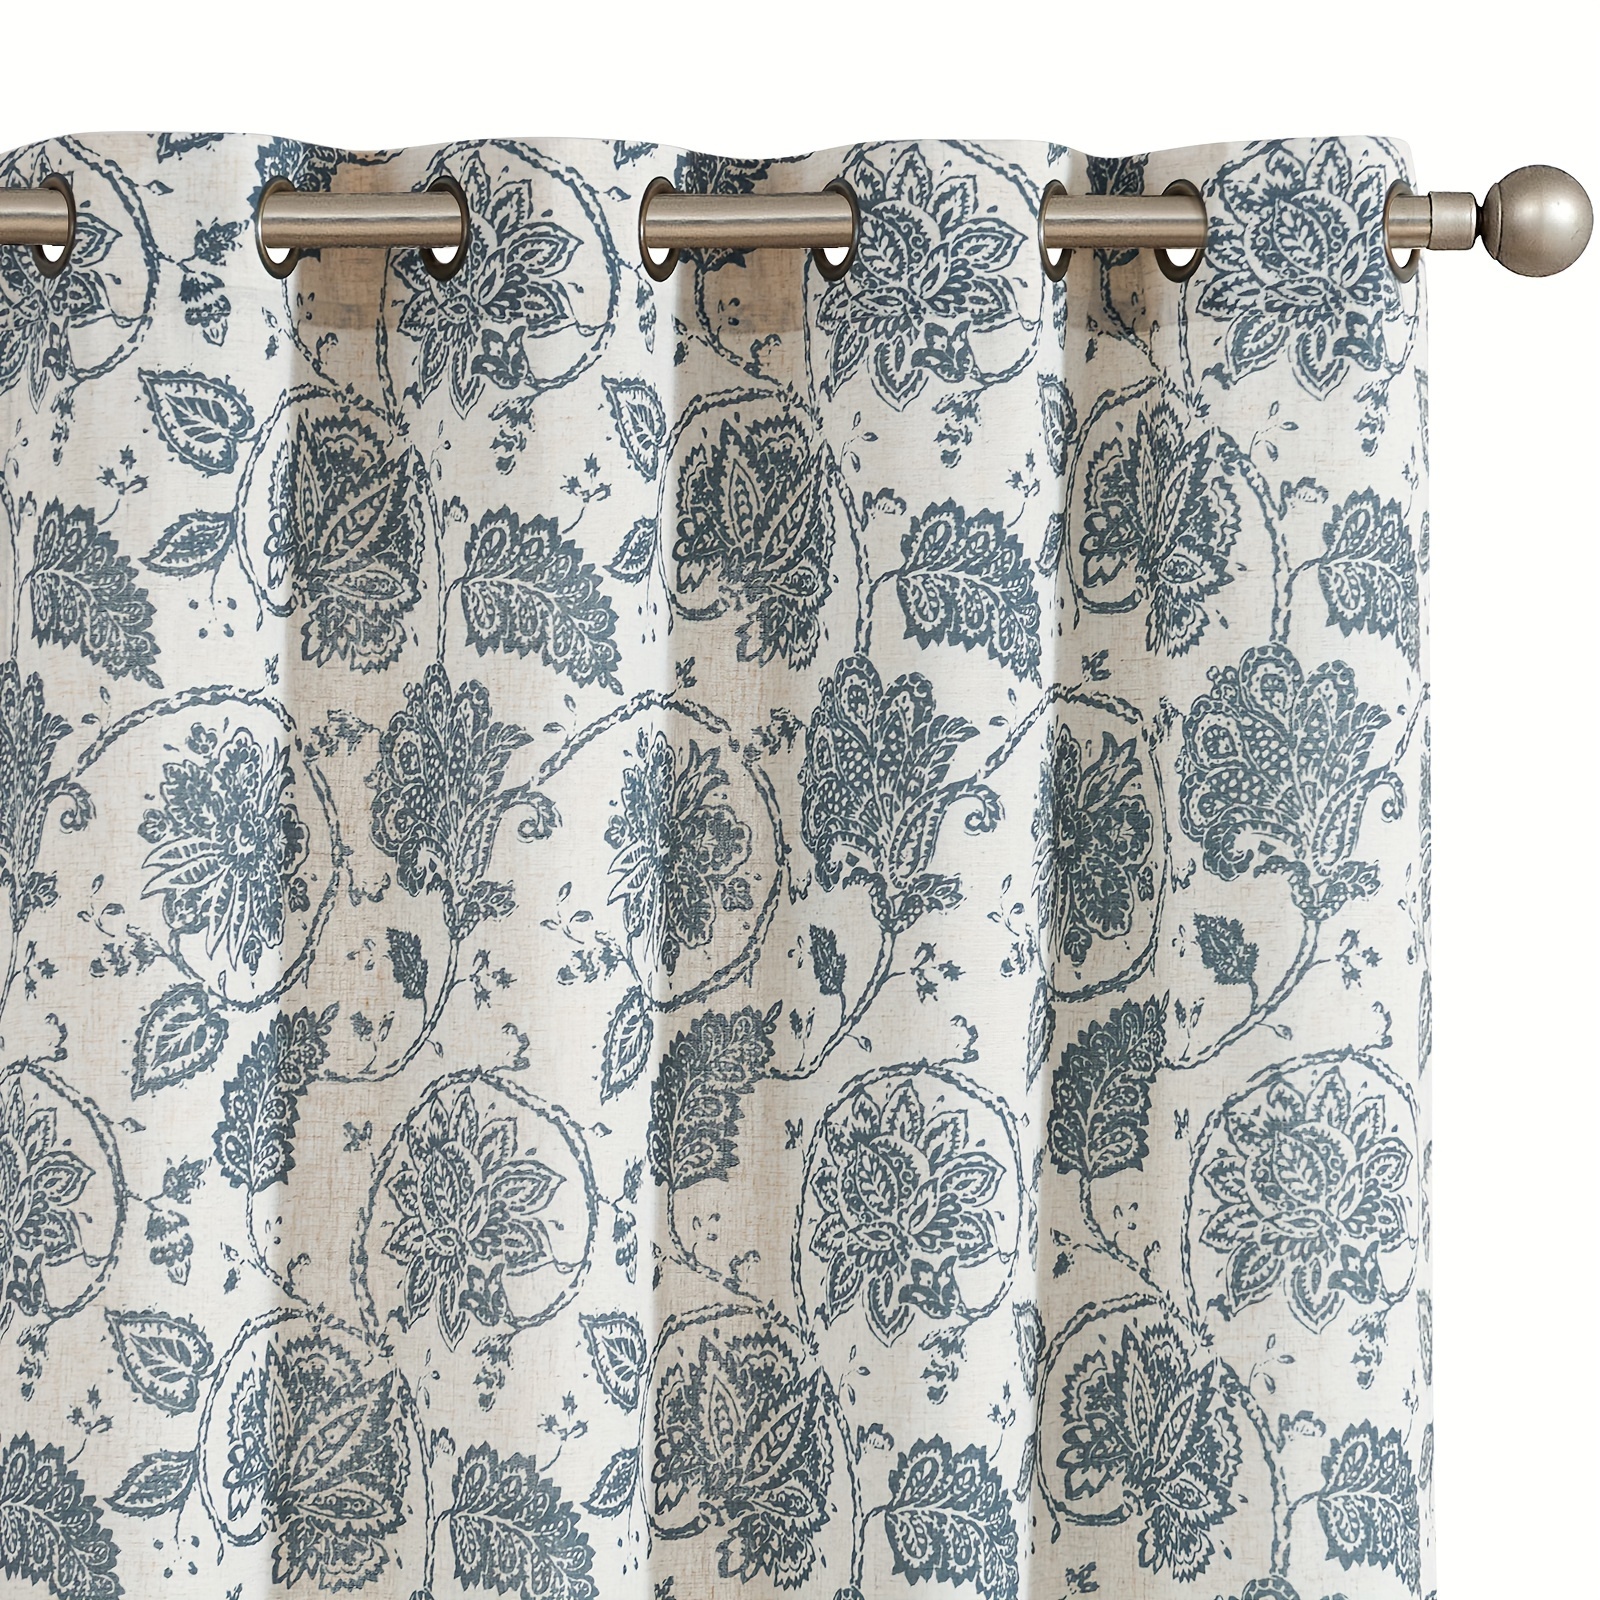 

2pcs Vintage Floral Paisley Linen Curtains, Grommet Top Light Filtering Window Drapes, 54 Inch Length, Blue Pattern For Living Room Bedroom, Farmhouse Style Home Decor